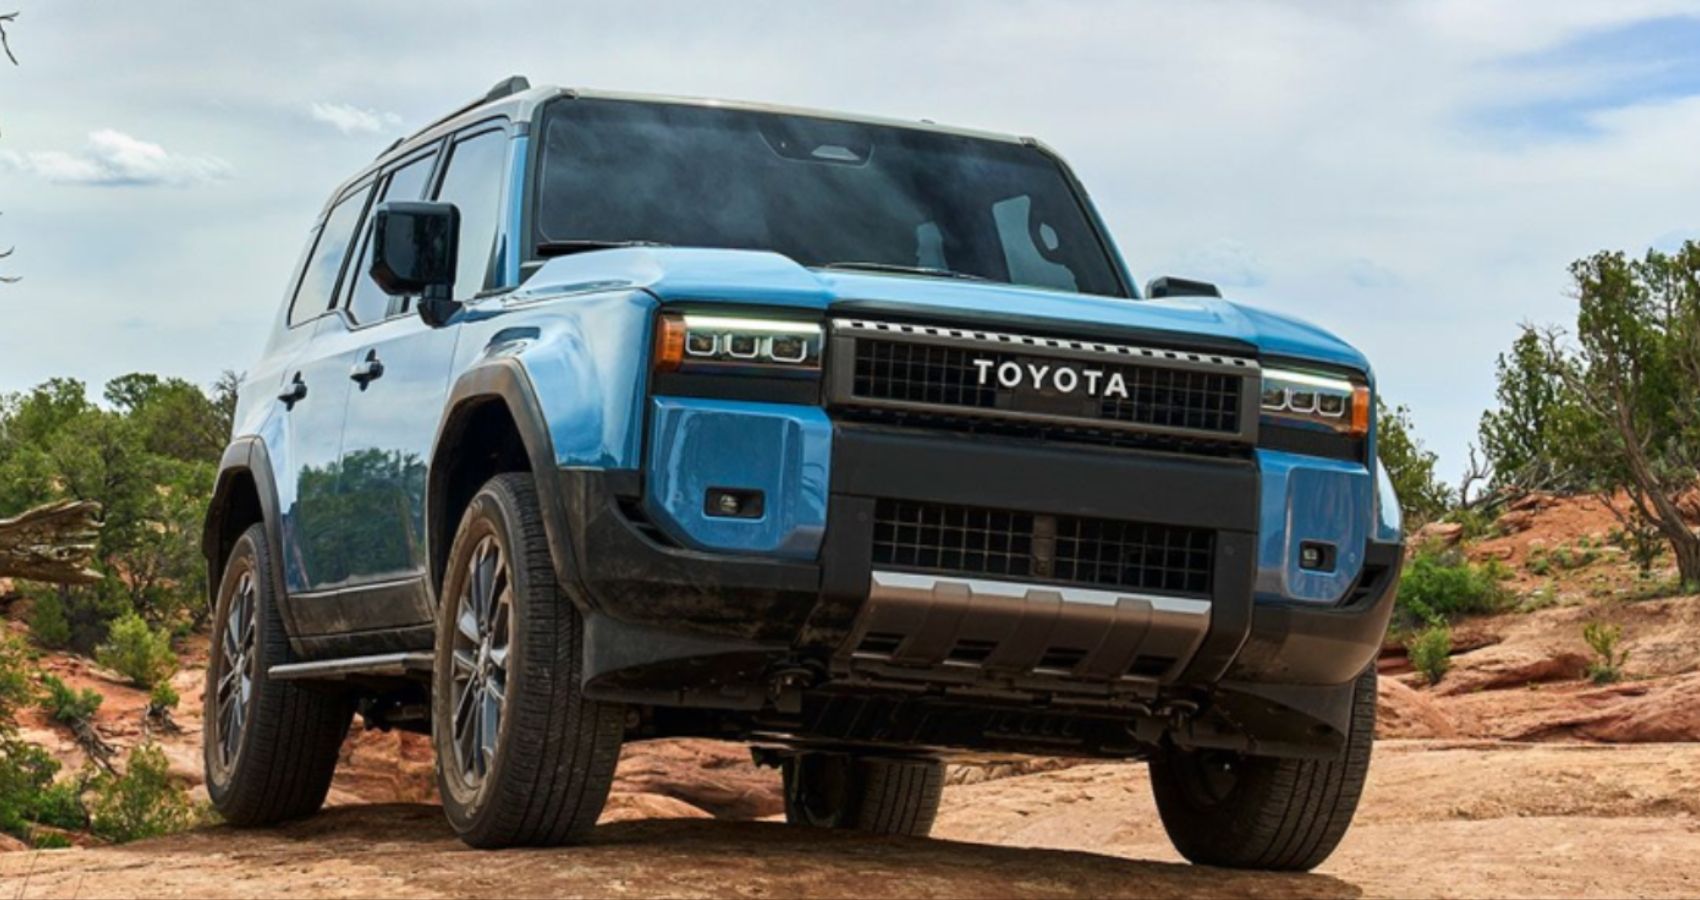 2024 Land Cruiser Vs Land Rover Defender Which One Should You Buy?